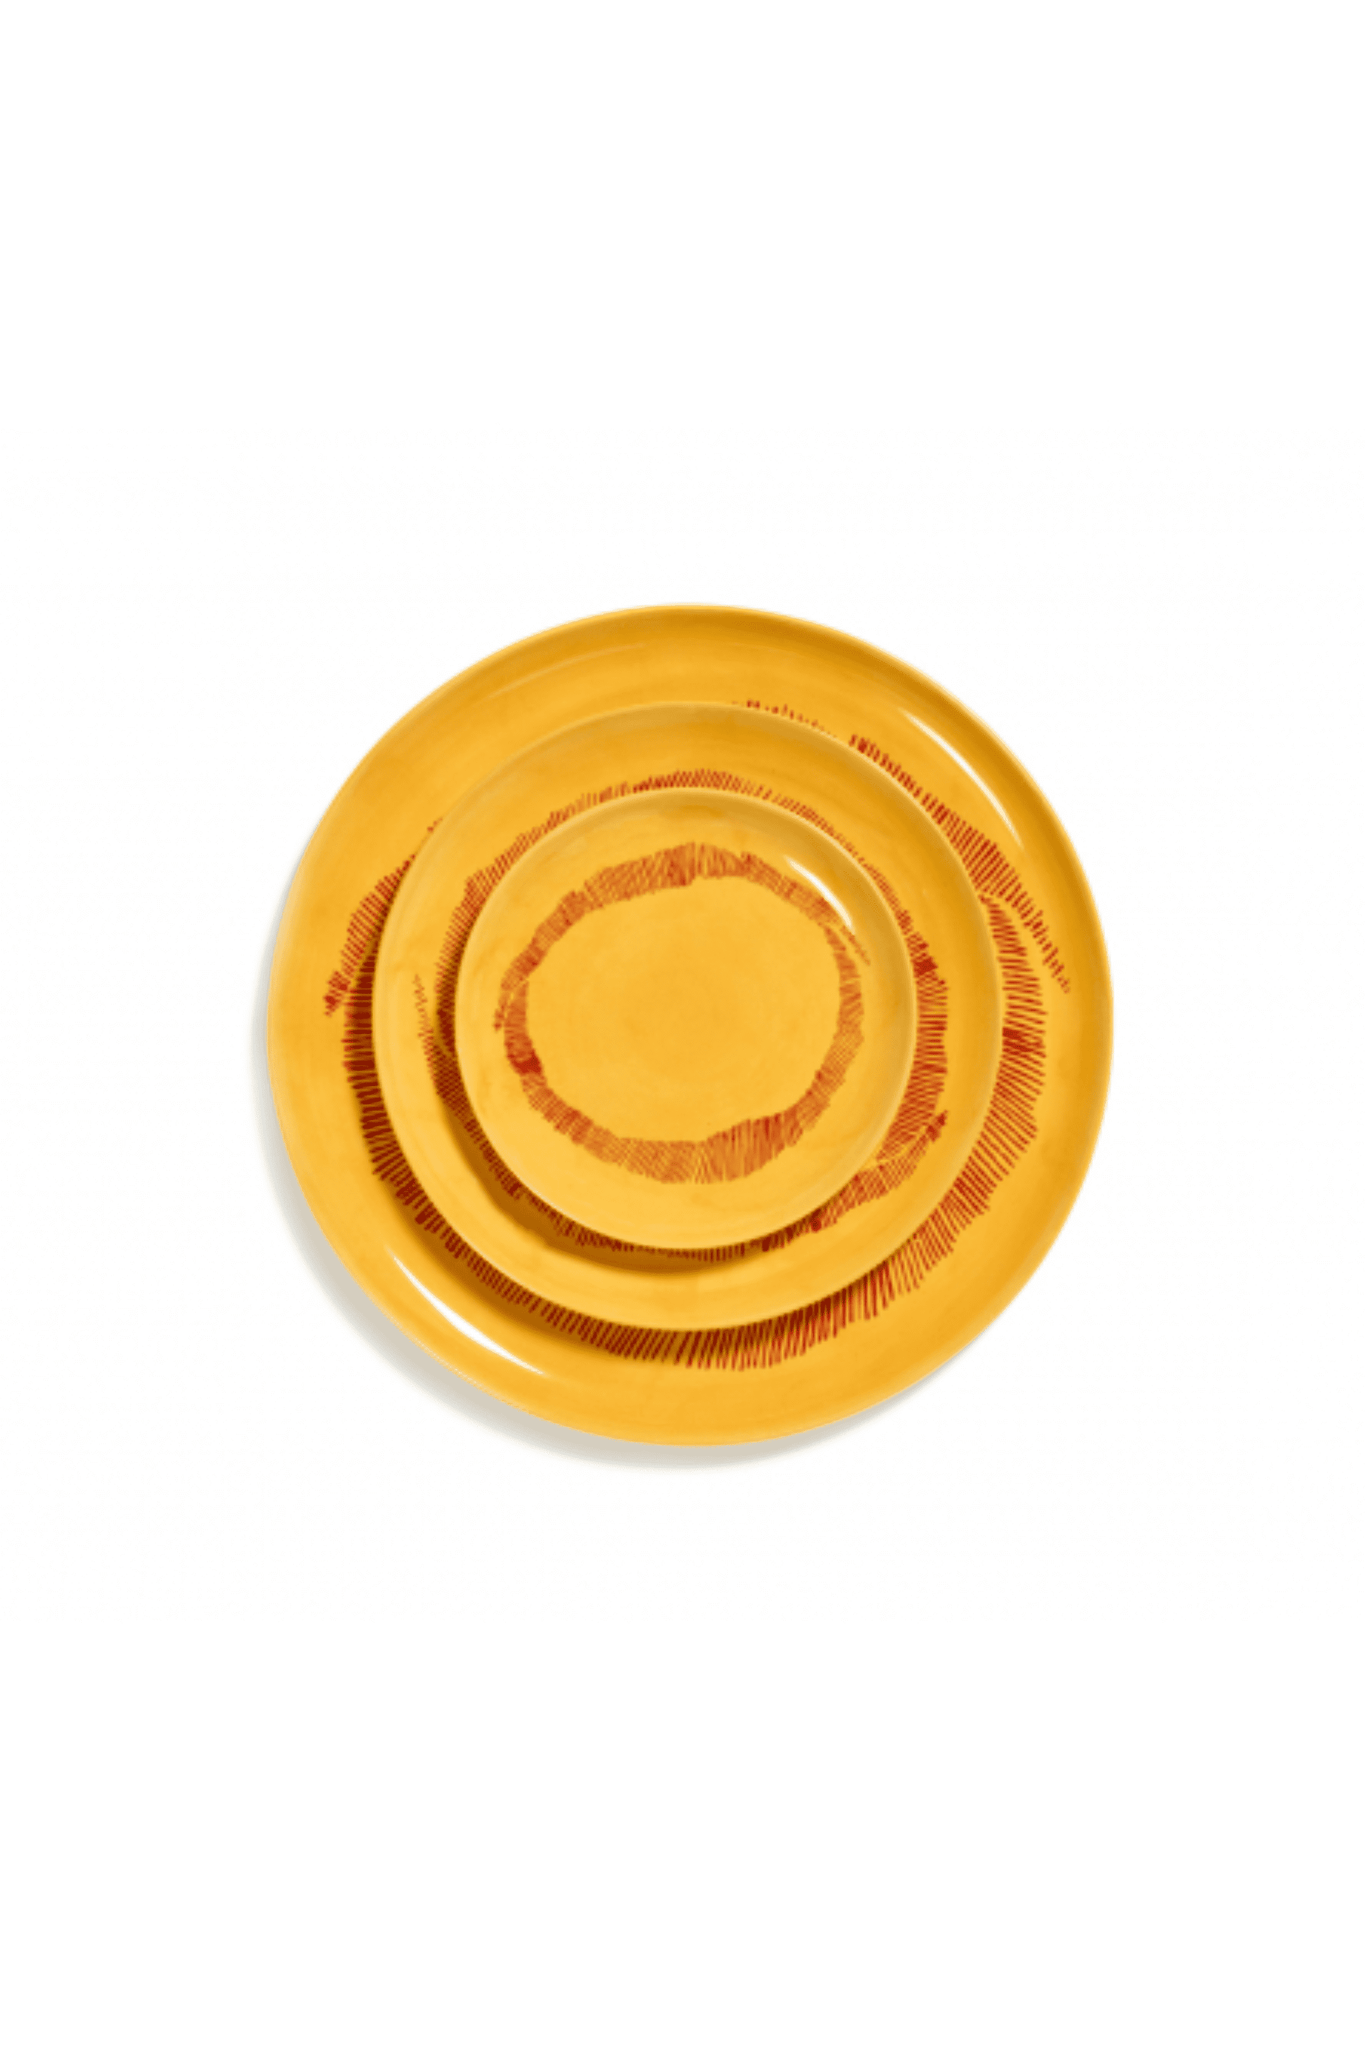 Set of 2 Small Plates, Sunny Yellow Swirl with Red Stripes Ottolenghi Serax, top view shown stacked